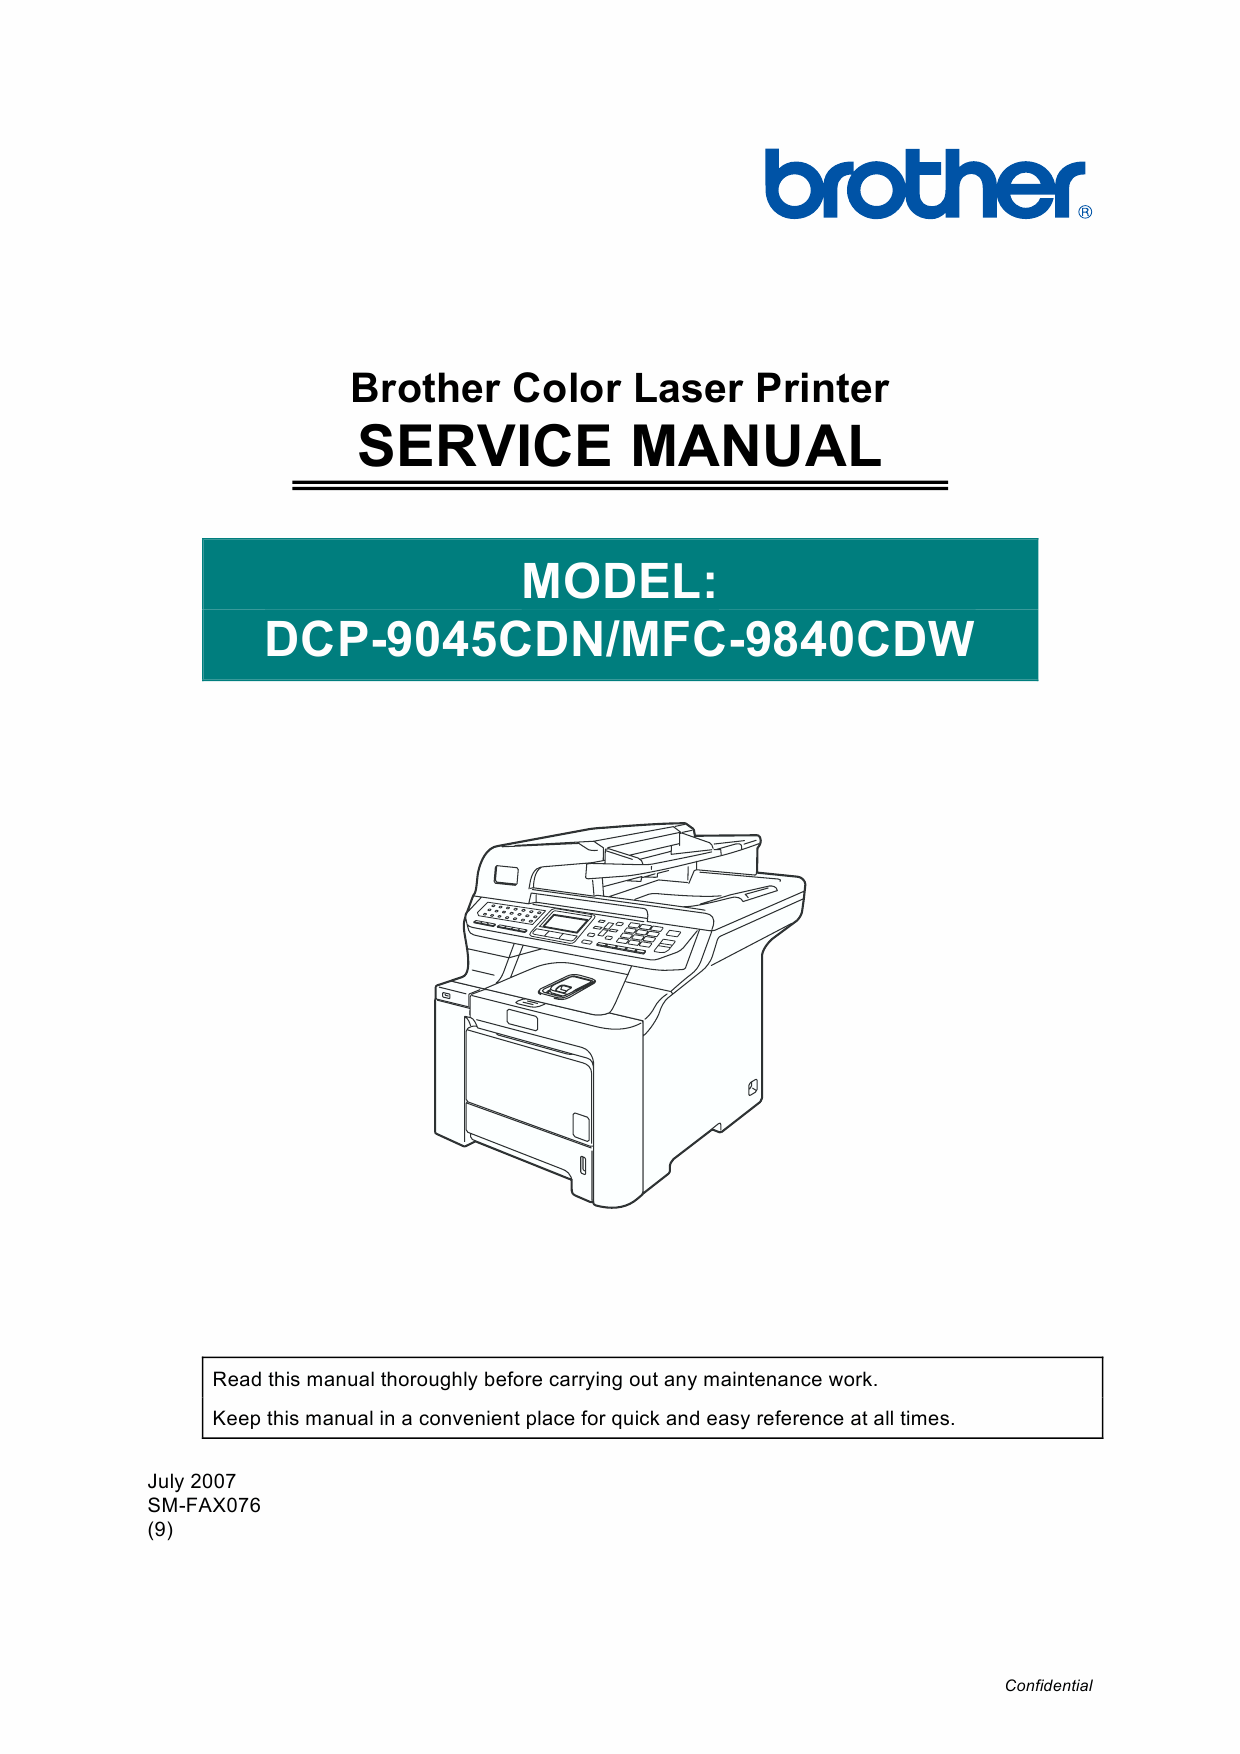 Brother Laser-MFC 9840CDW DCP9045CDN Service Manual-1